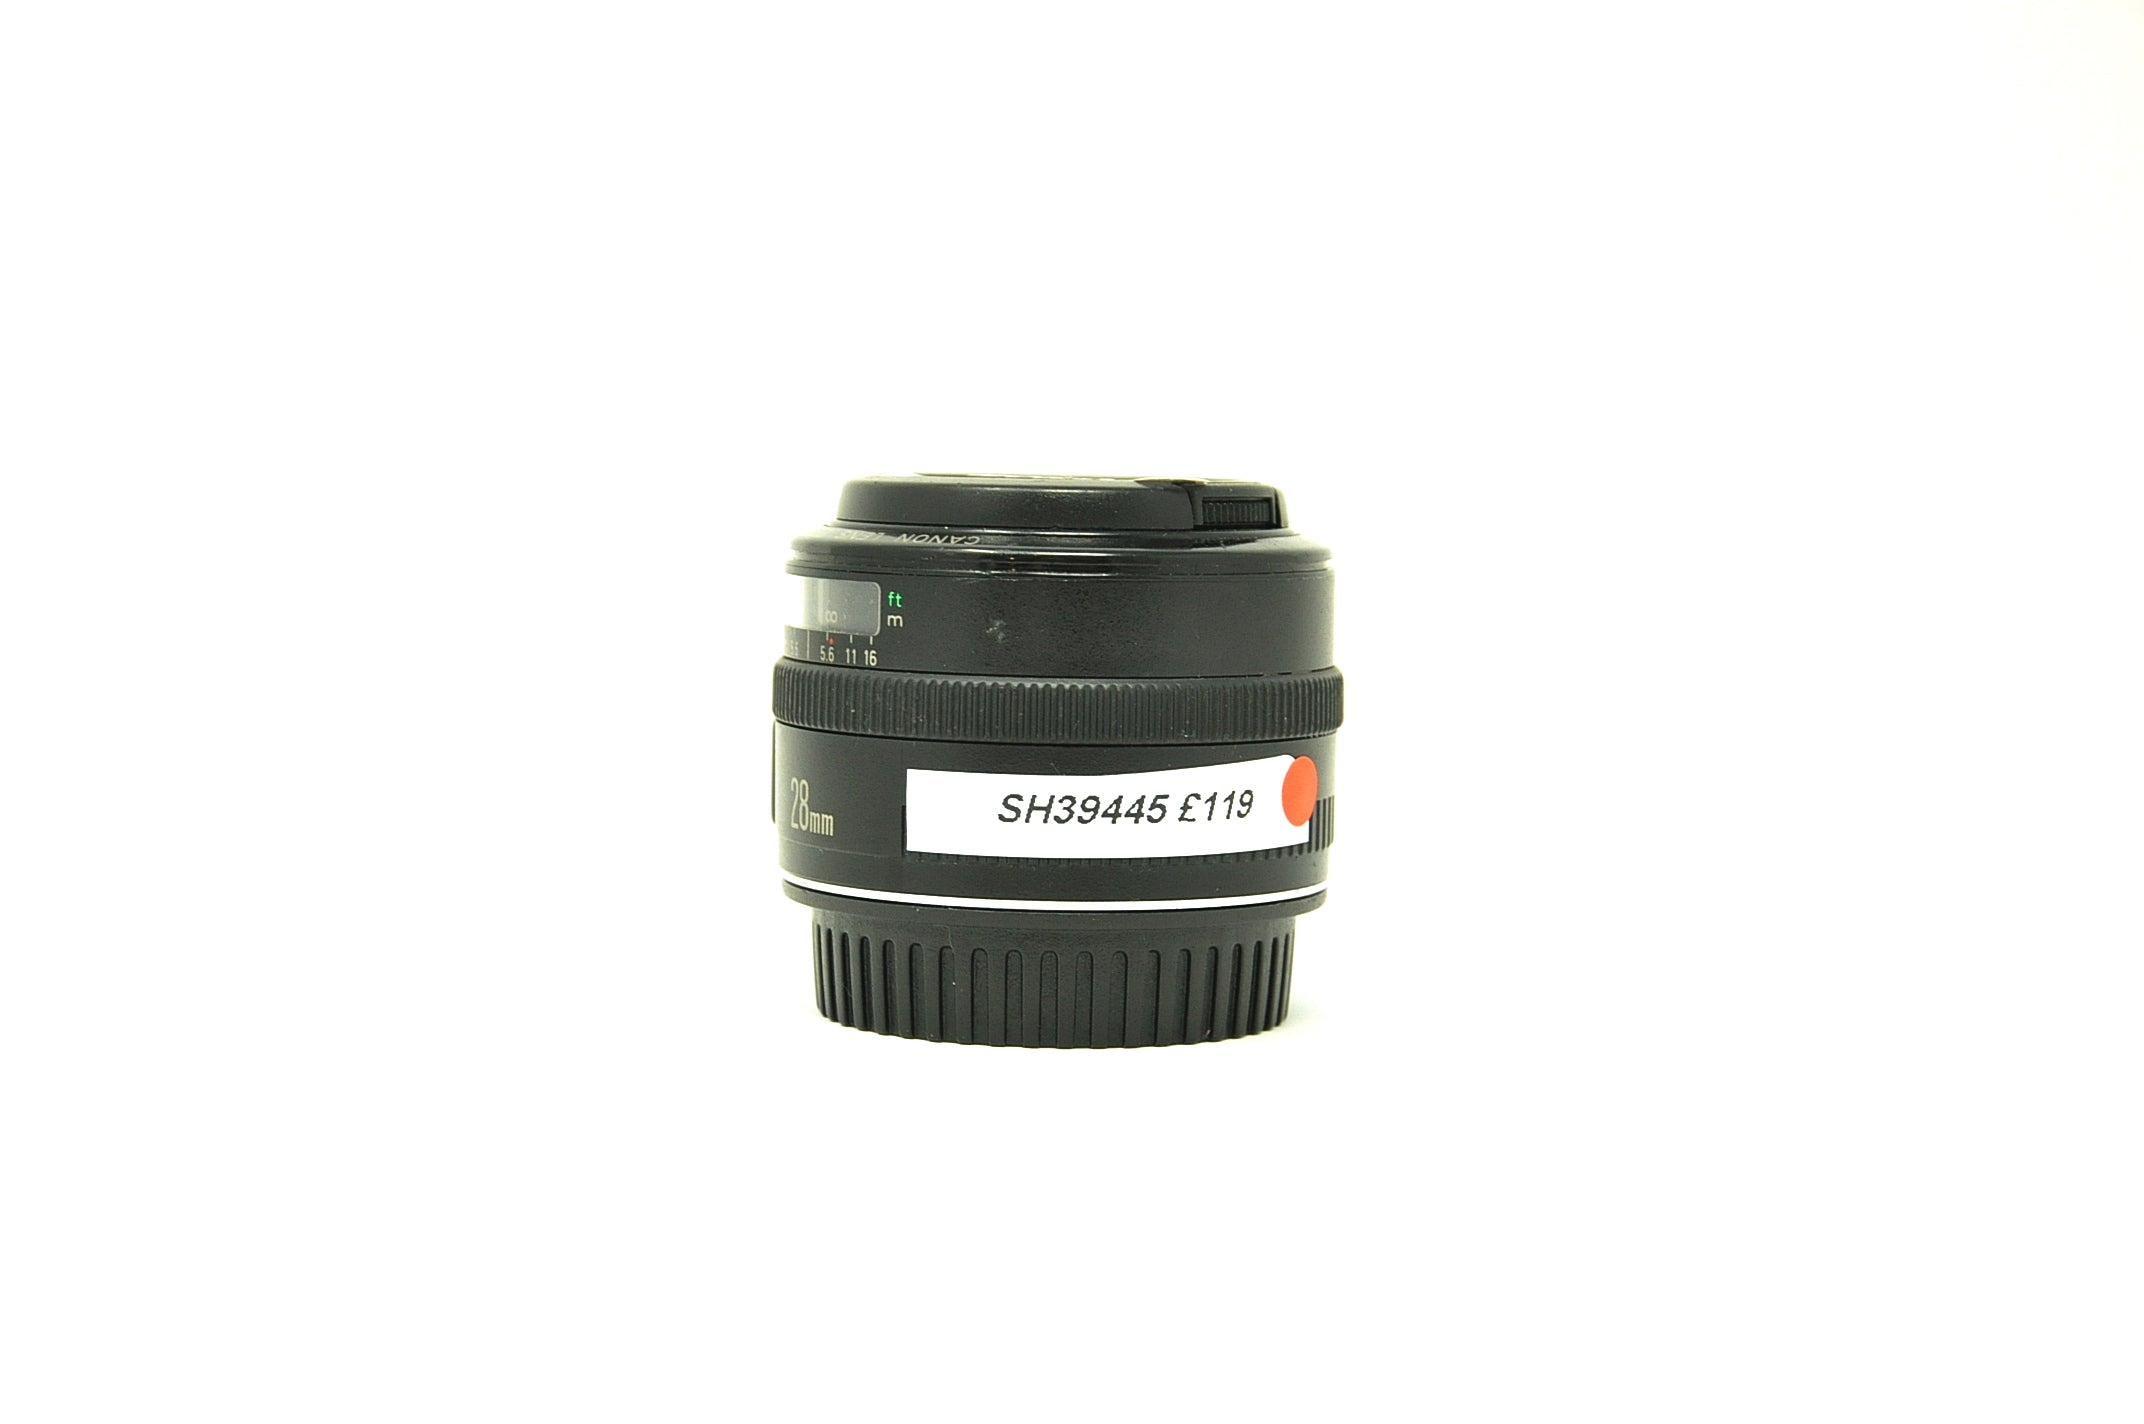 Used Canon EF 28MM F2.8 Prime wide angle lens (SH39445)